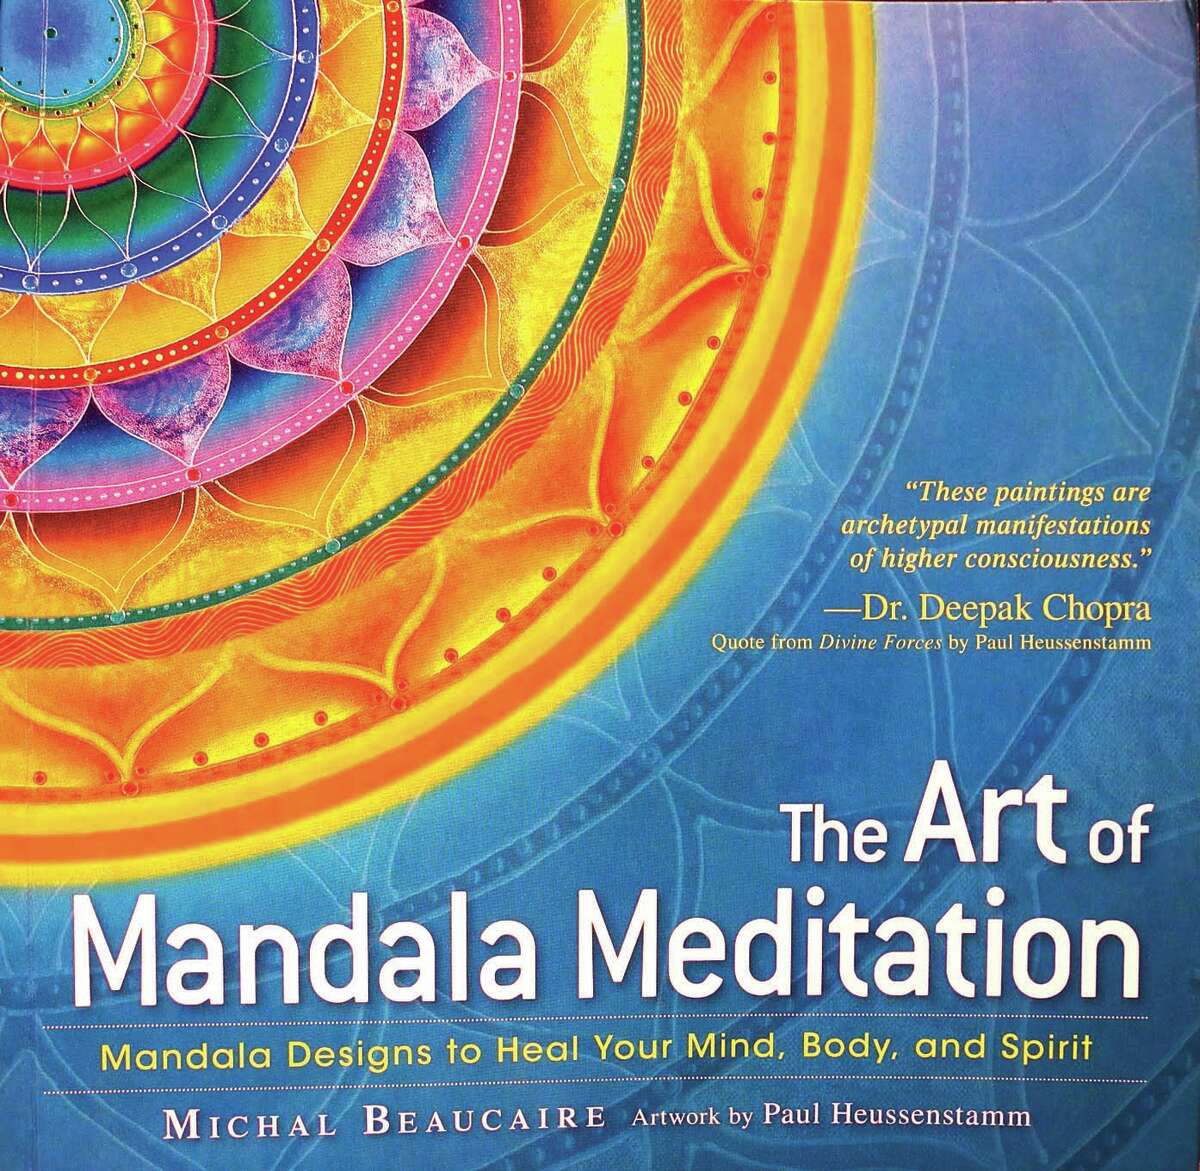 "The Art of Mandala Meditation," by Michal Beaucaire, Published by F+W Media